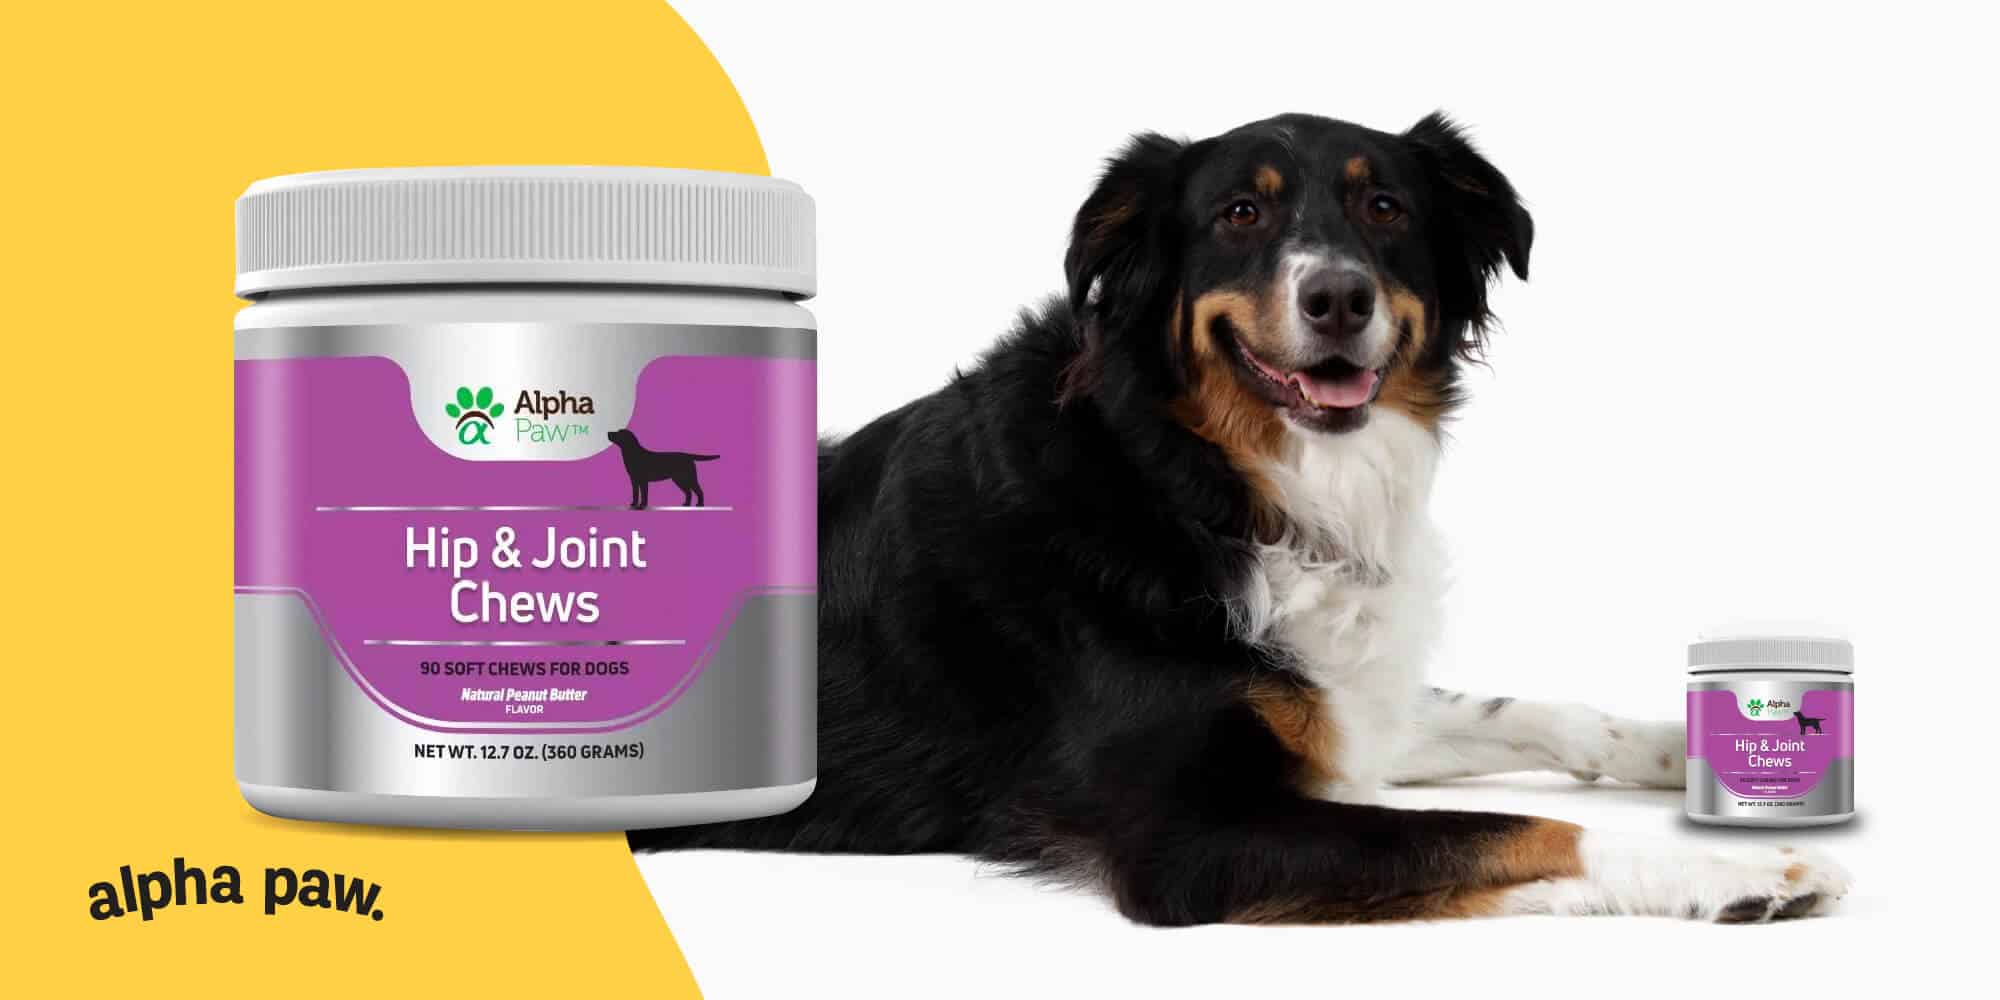 12 reasons to choose alpha paw’s hip and joint chews for dogs